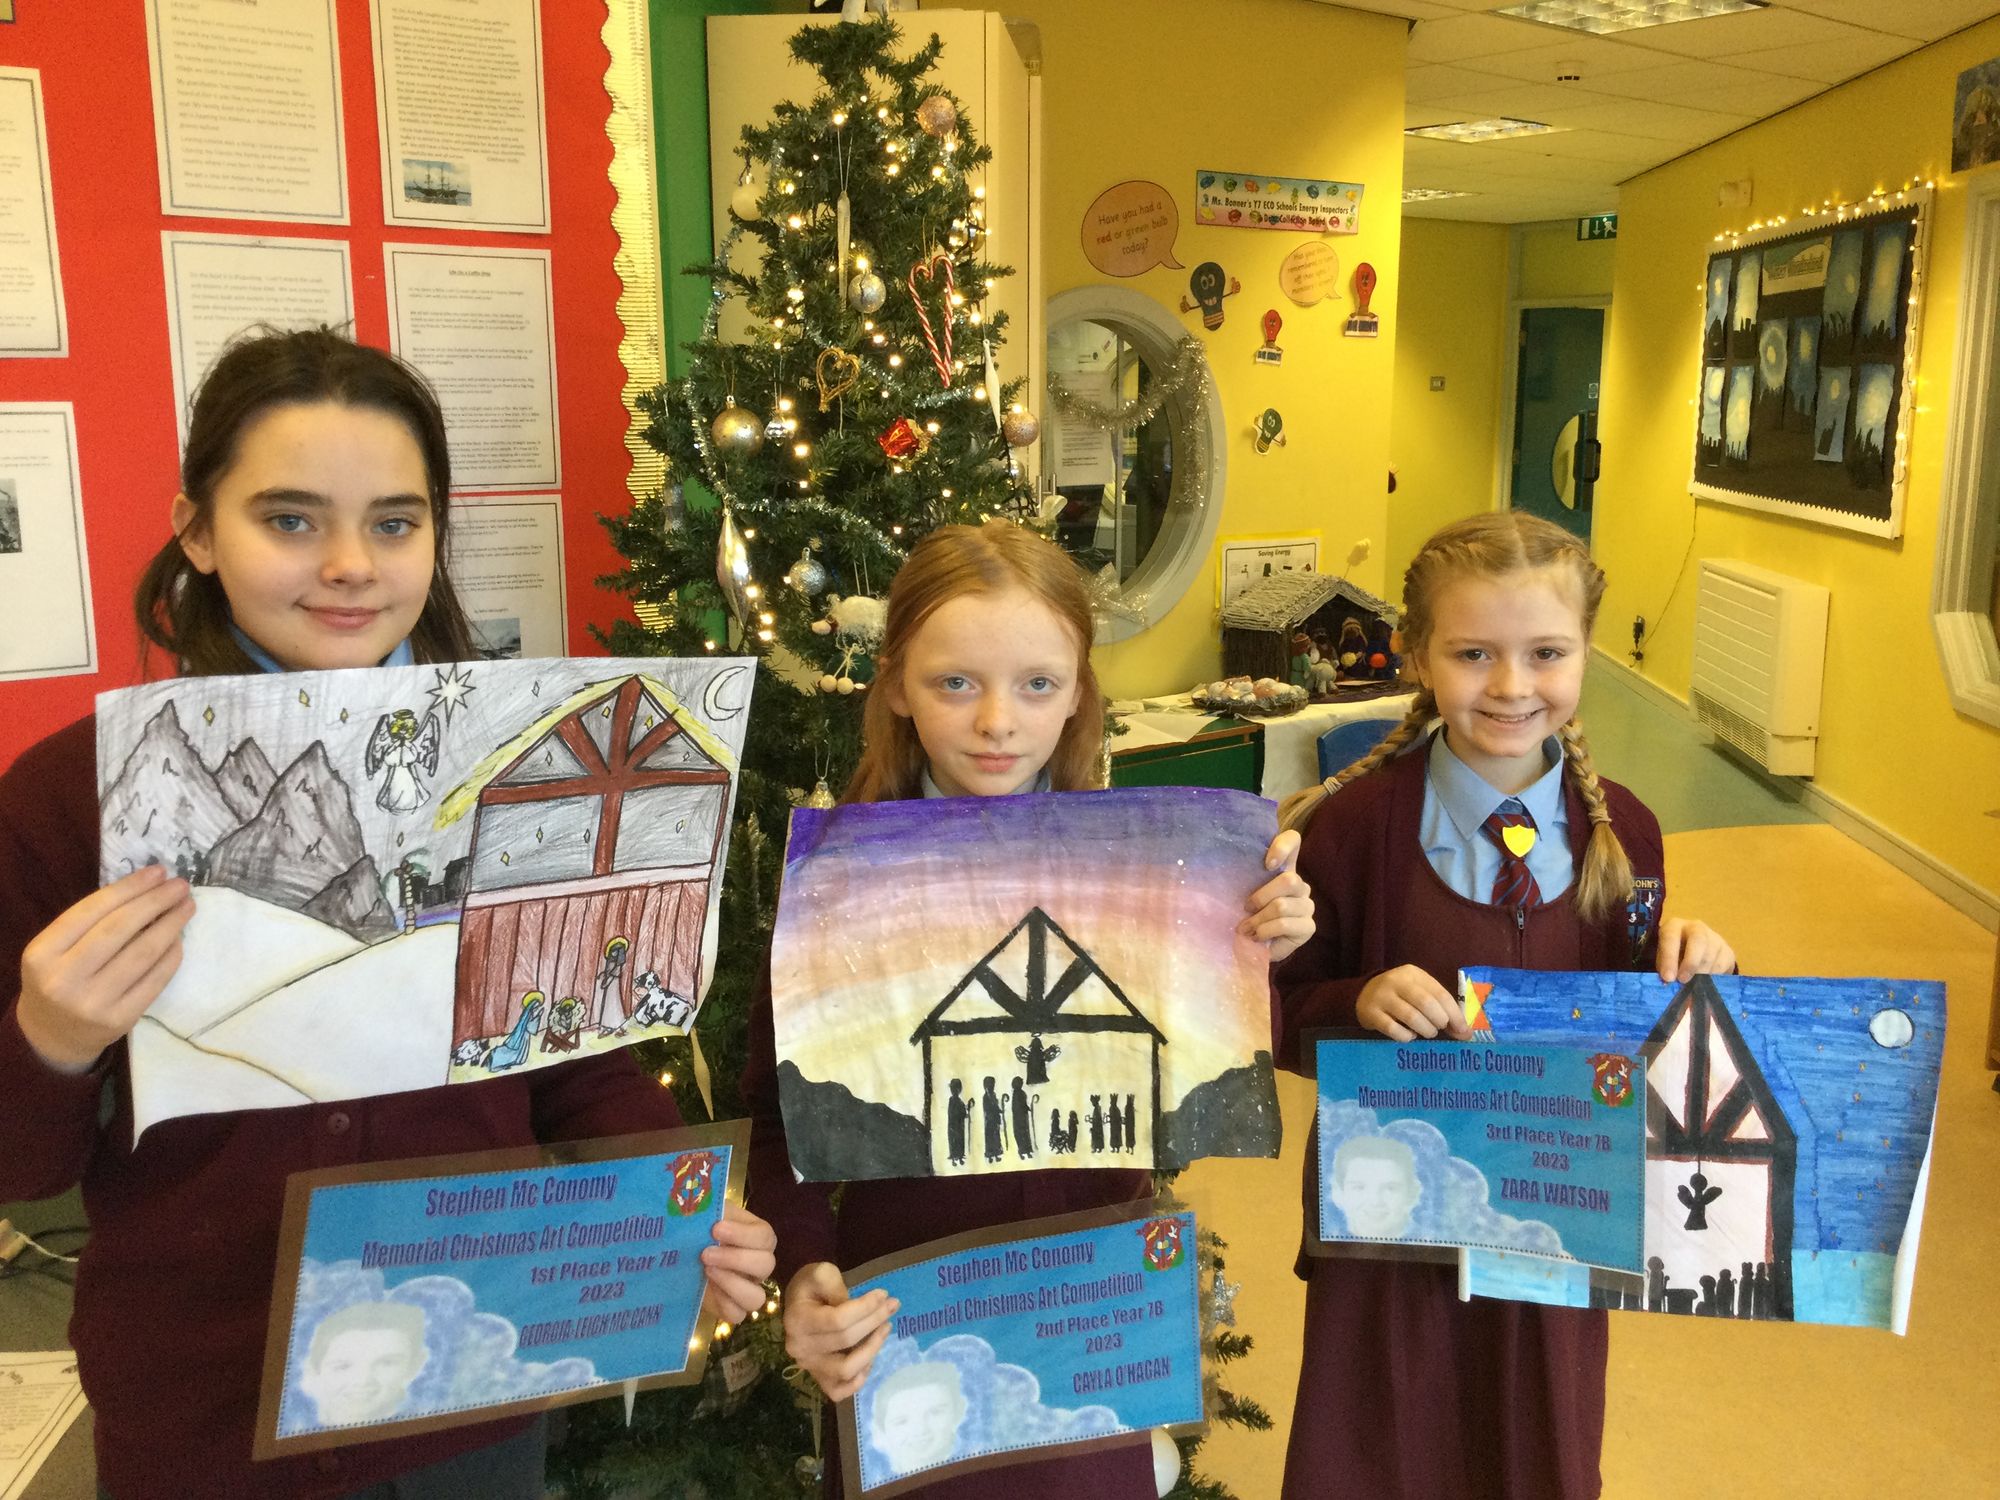 Year 7B winners of the Stephen McConomy Christmas Art competition